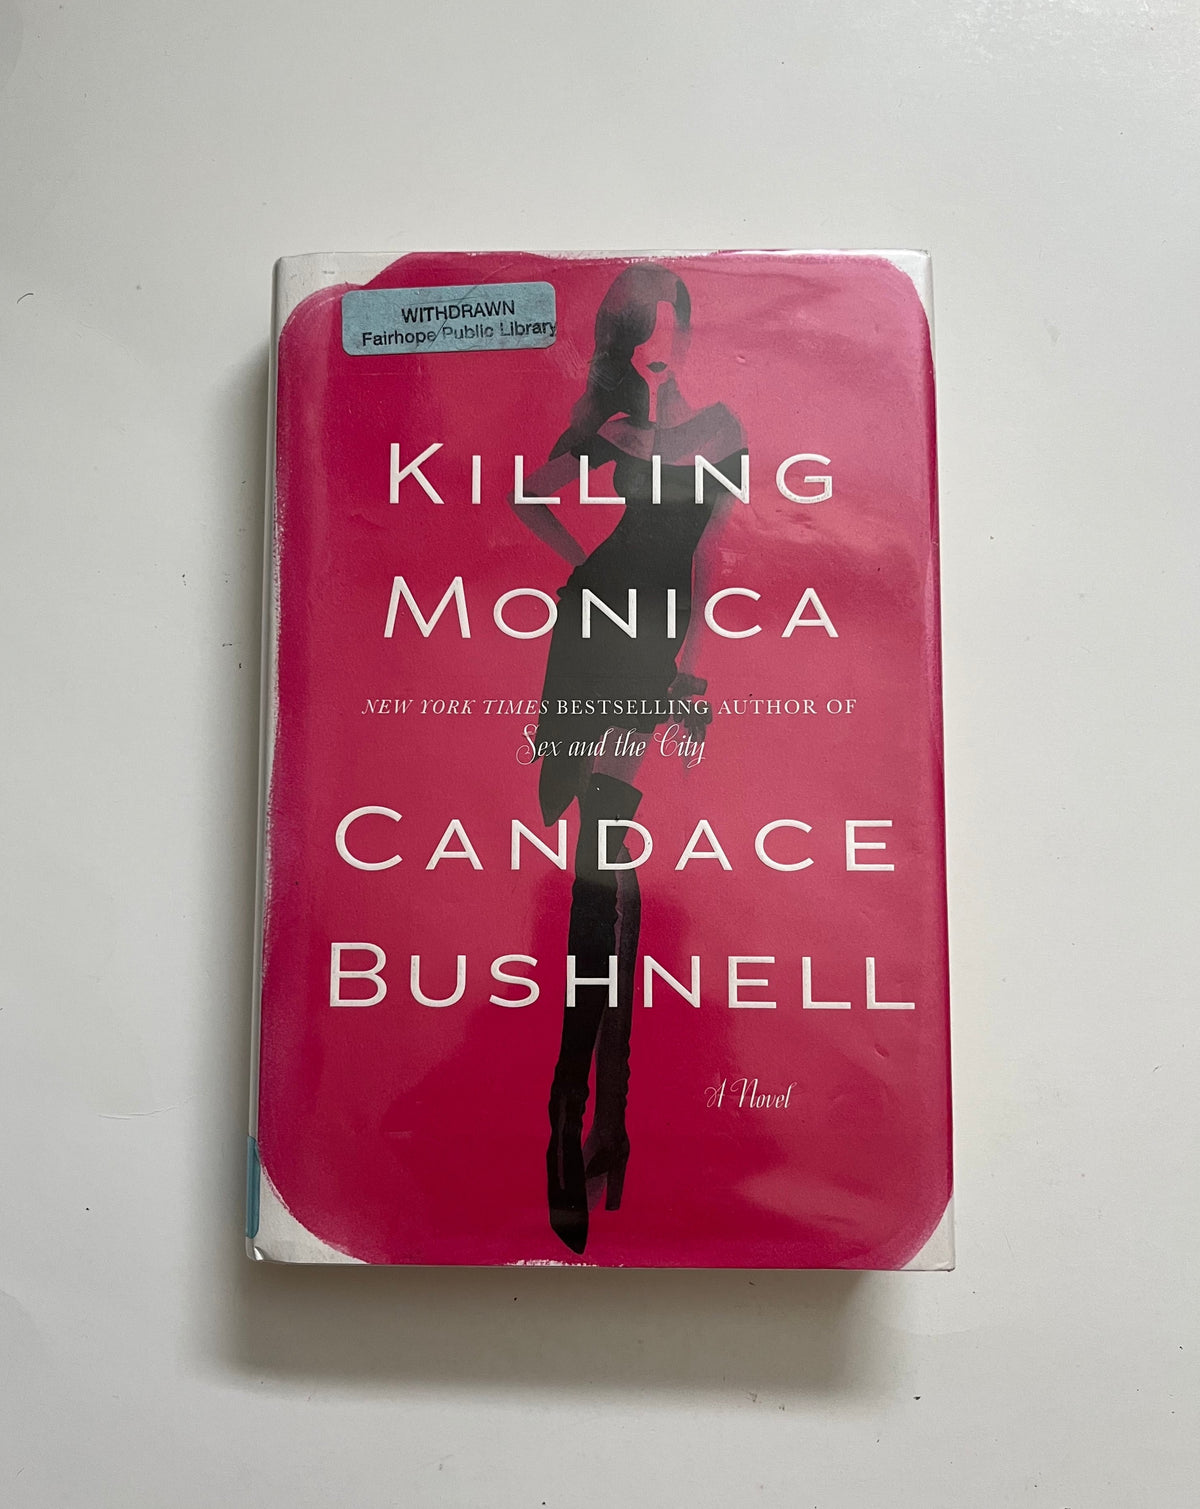 Killing Monica by Candice Bushnell